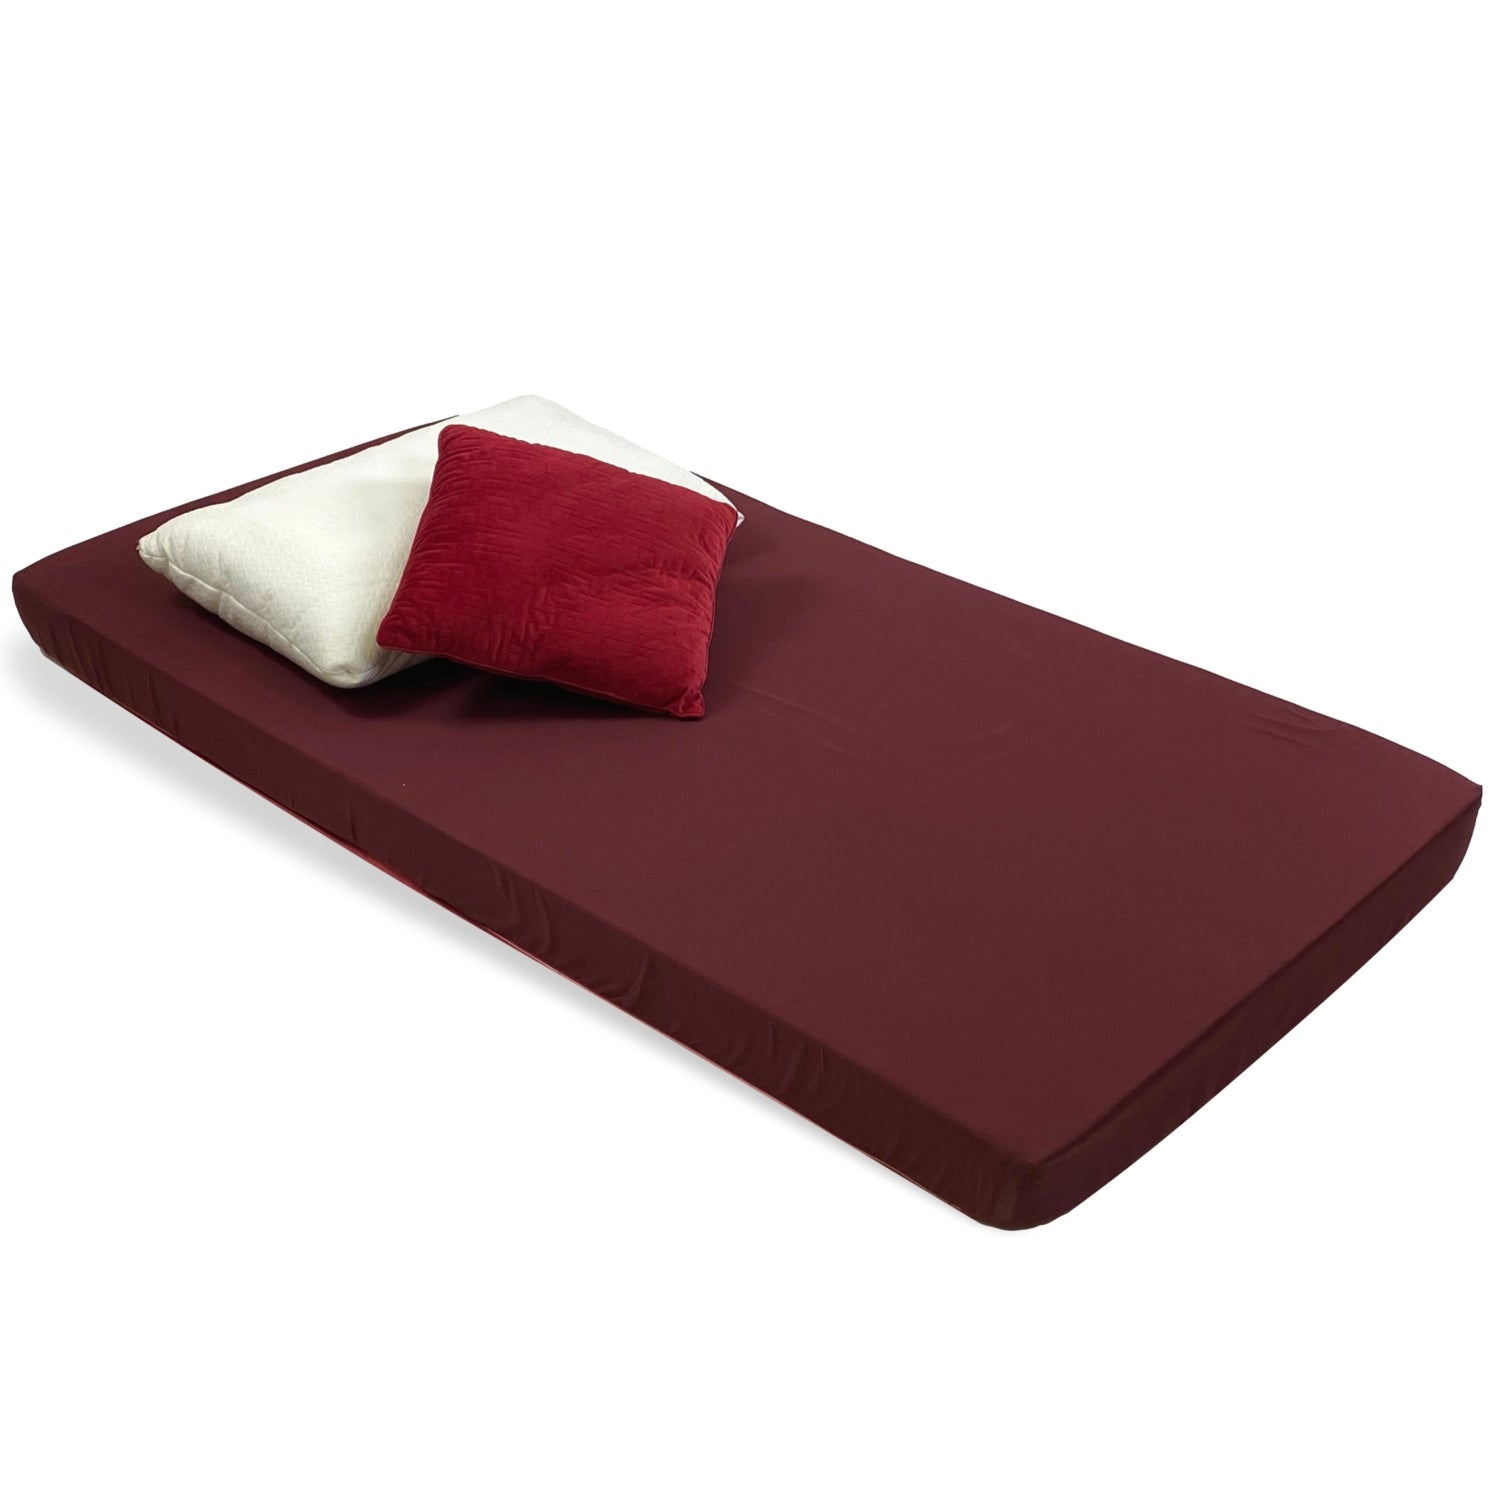 ViscoLogic CHARISMA Flip able Reversible Twin Foam Mattress Perfect for Bunk Bed, Trundle, Guest Bed and Caravan Bed (Burgundy)